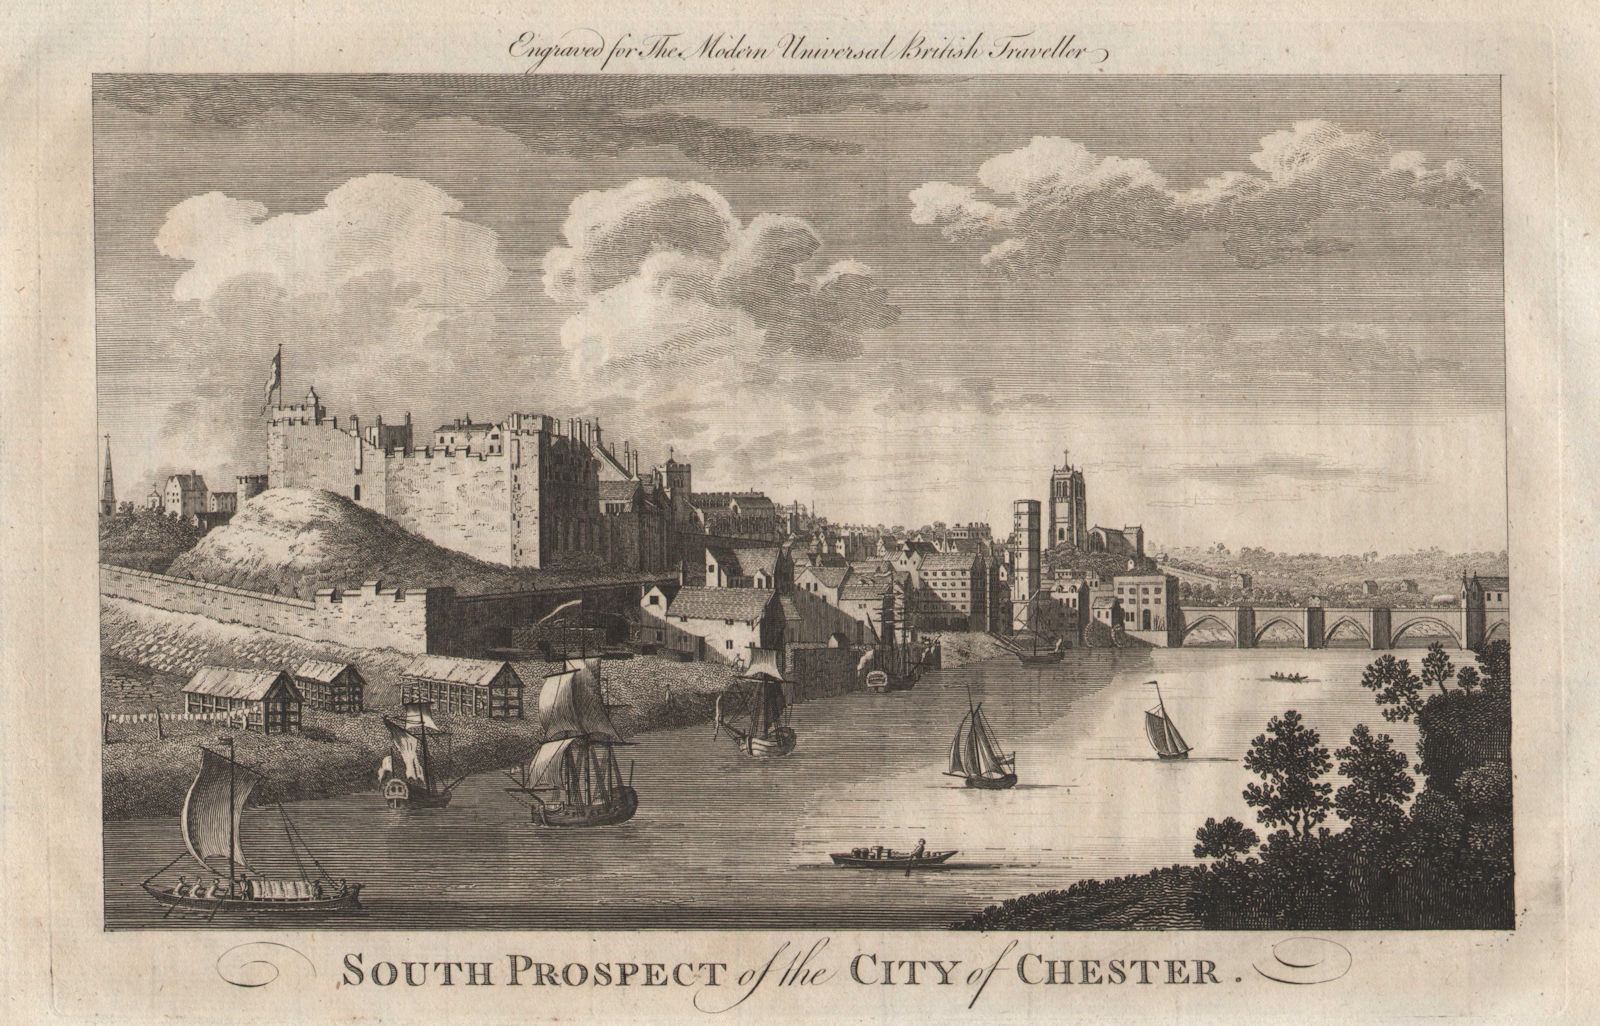 South prospect of the city of Chester. Cheshire. BURLINGTON 1779 old print